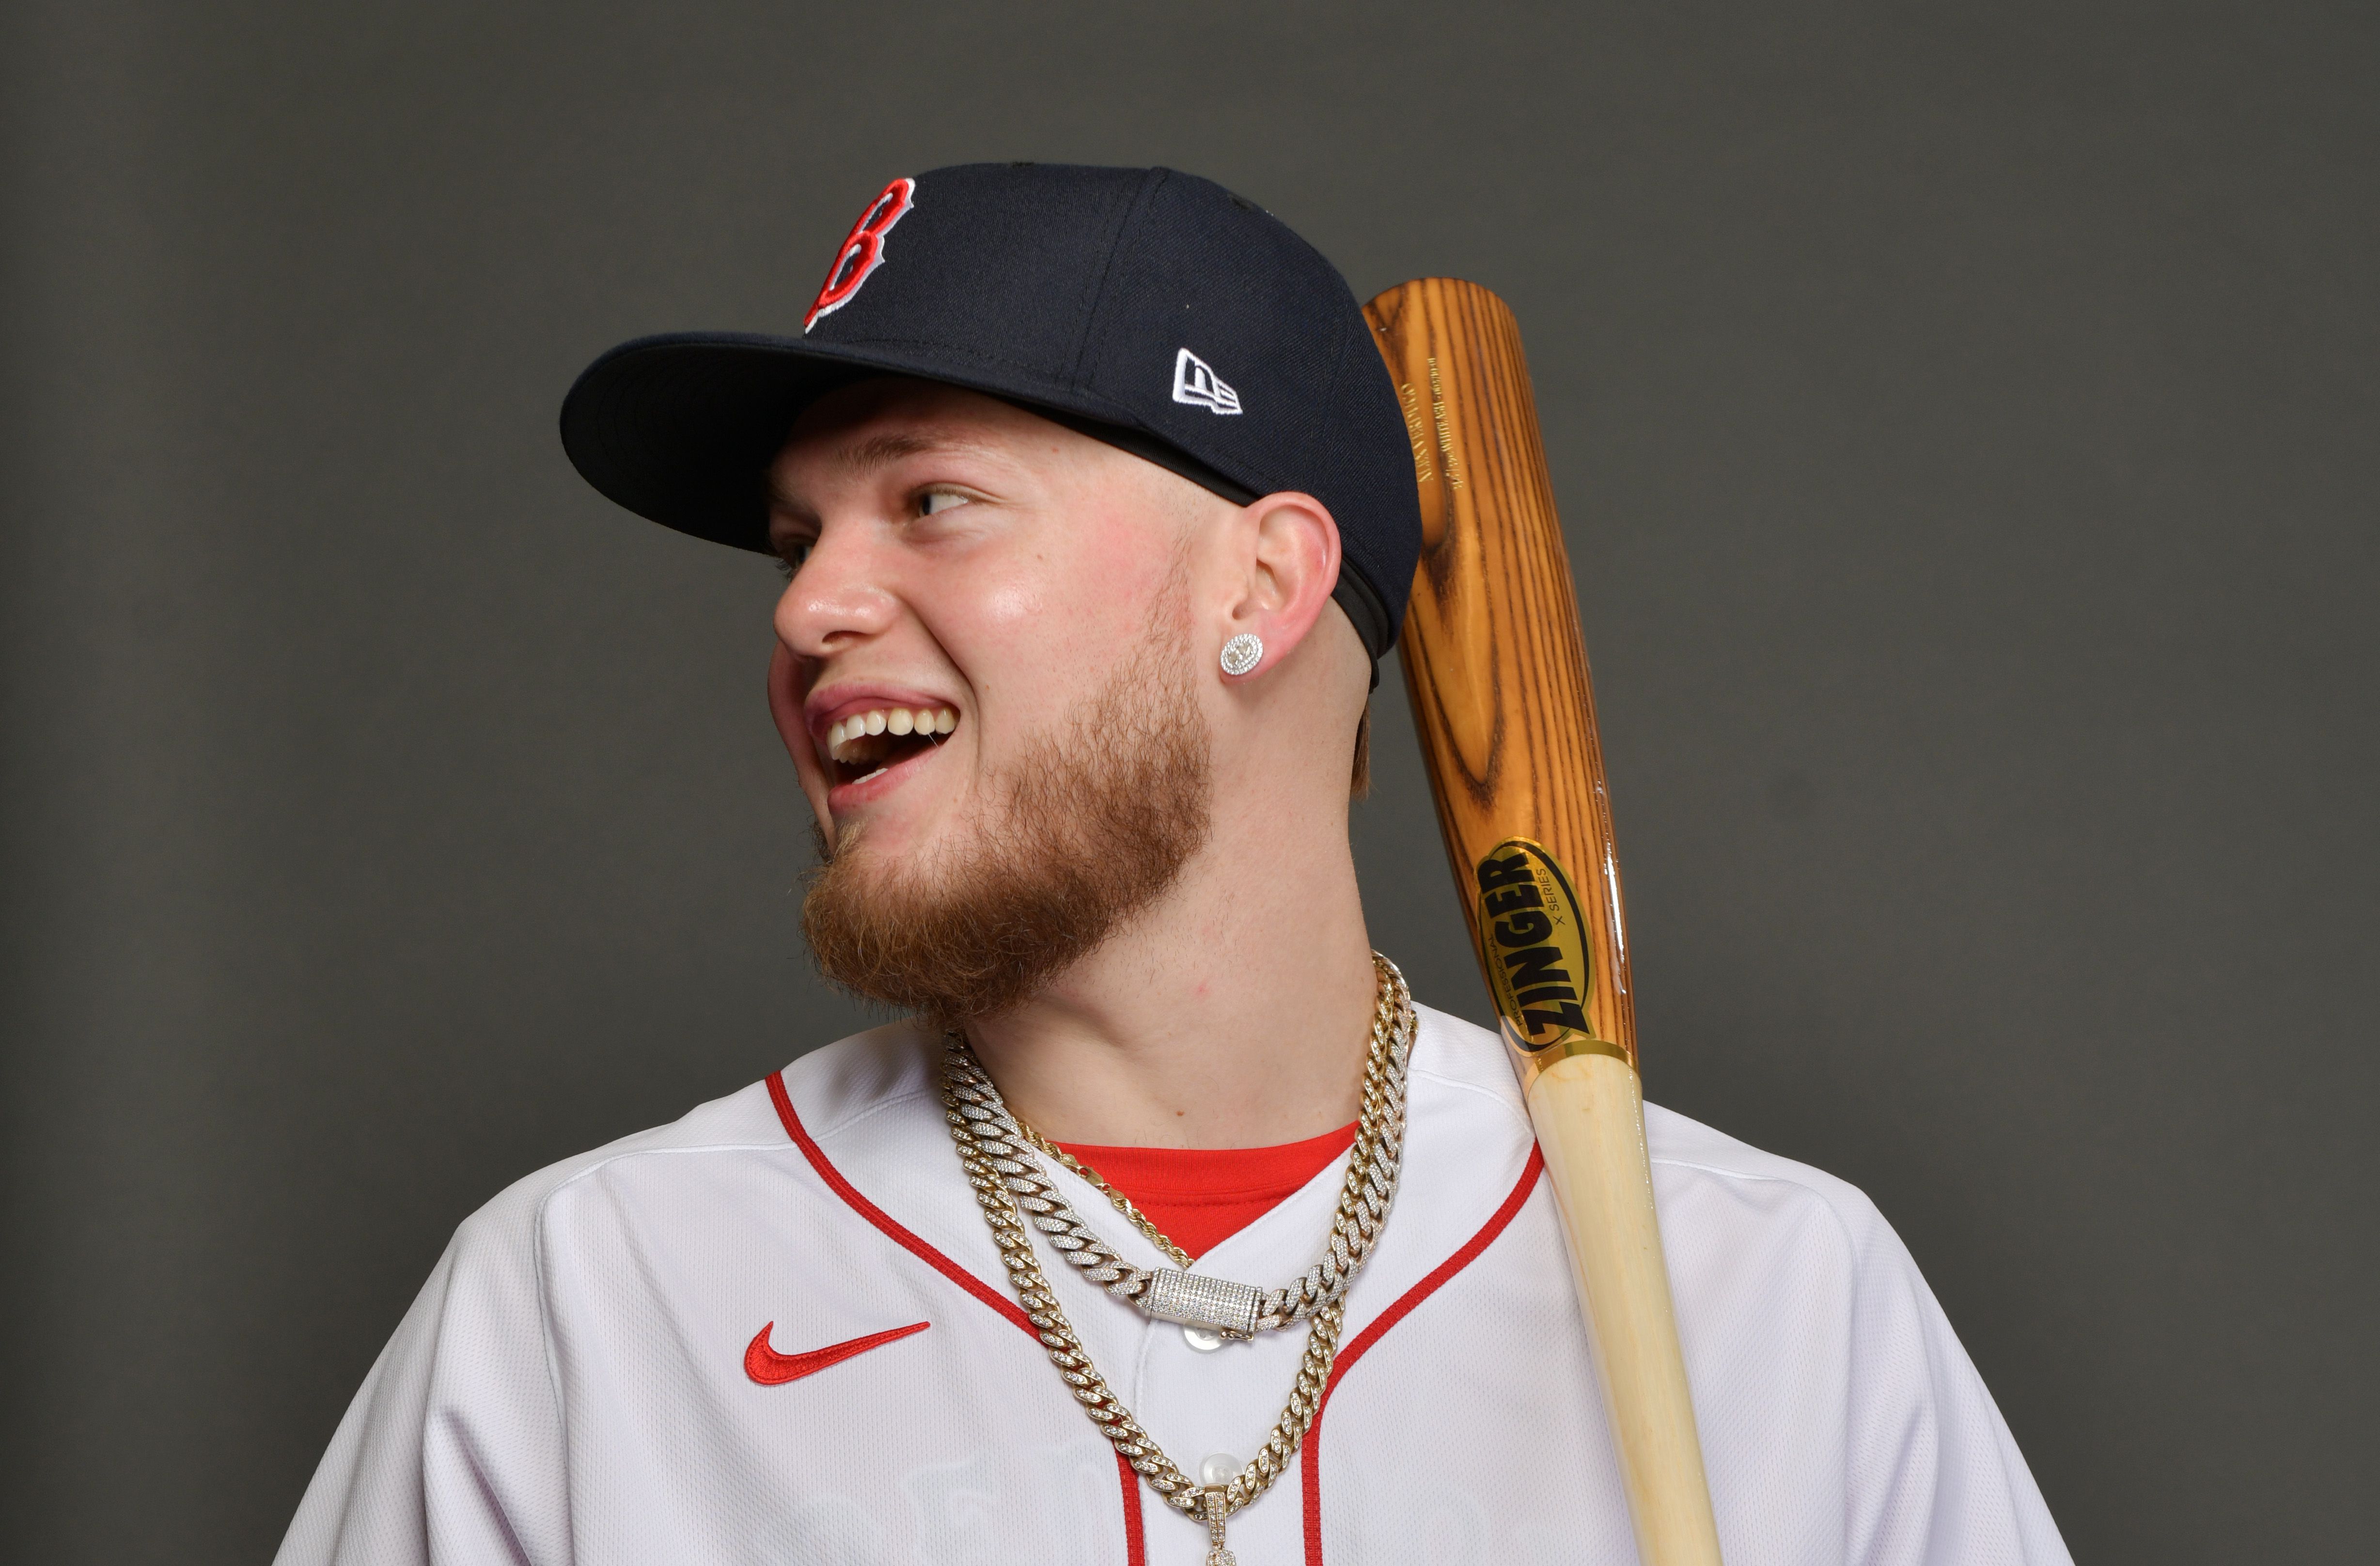 Alex Verdugo to wear No. 99 jersey with Red Sox